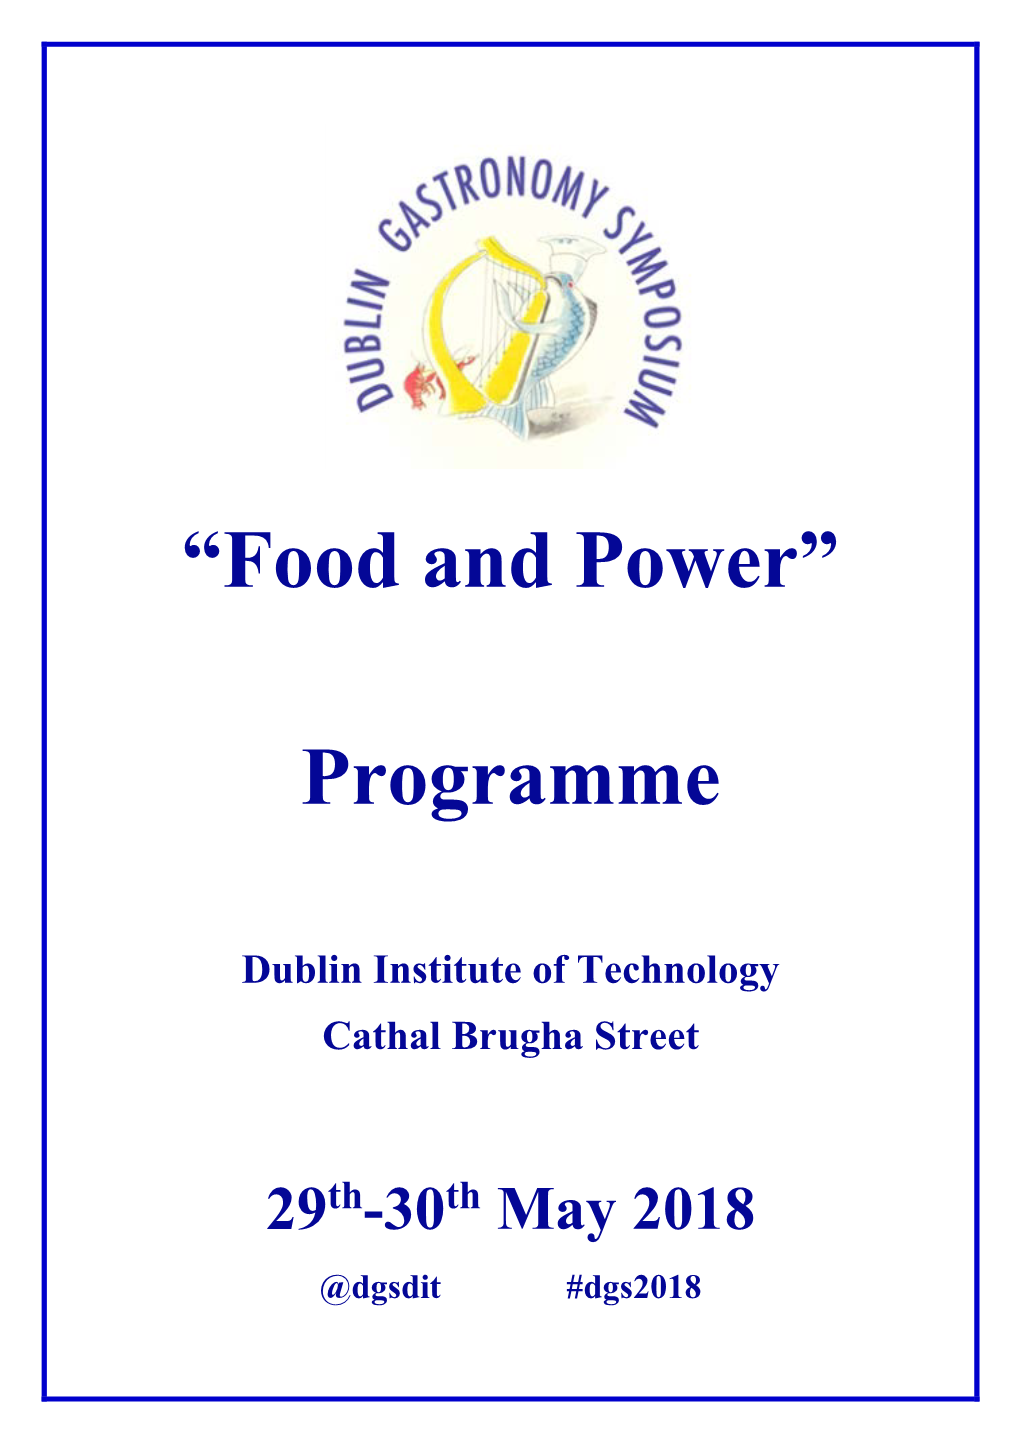 “Food and Power” Programme